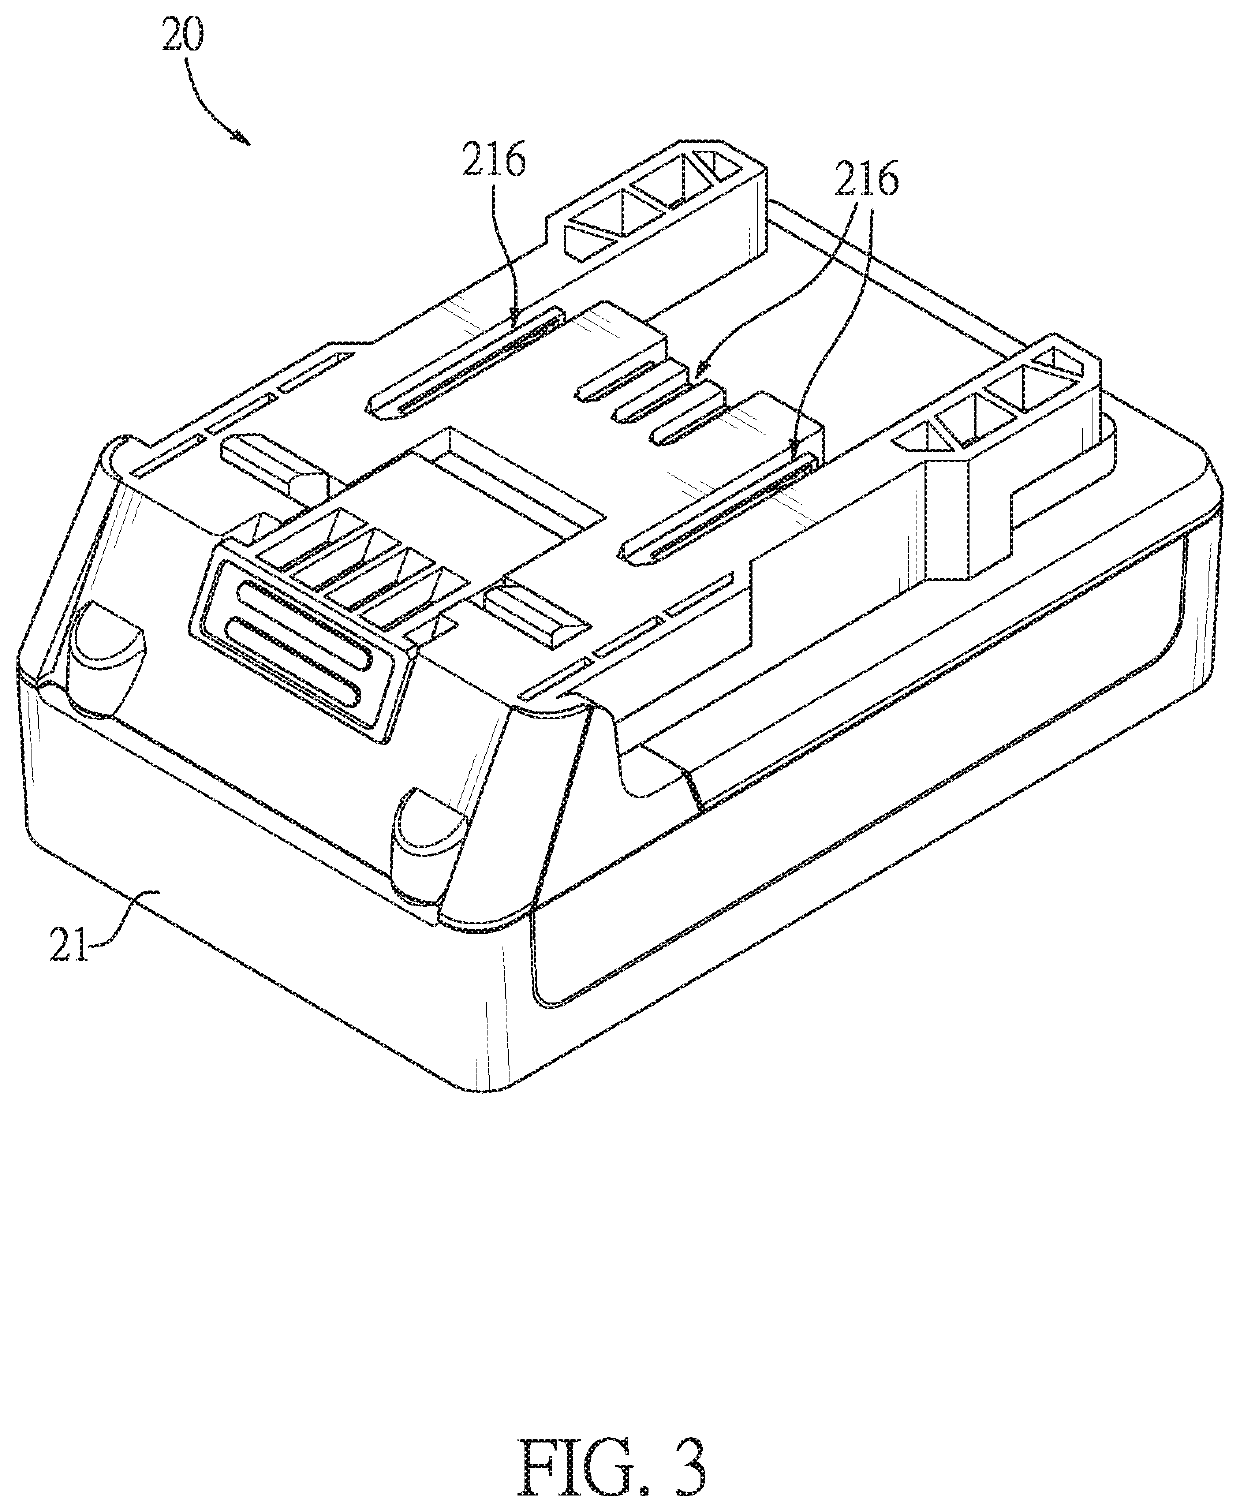 Assembling structure for a conductive plate of a handheld power tool